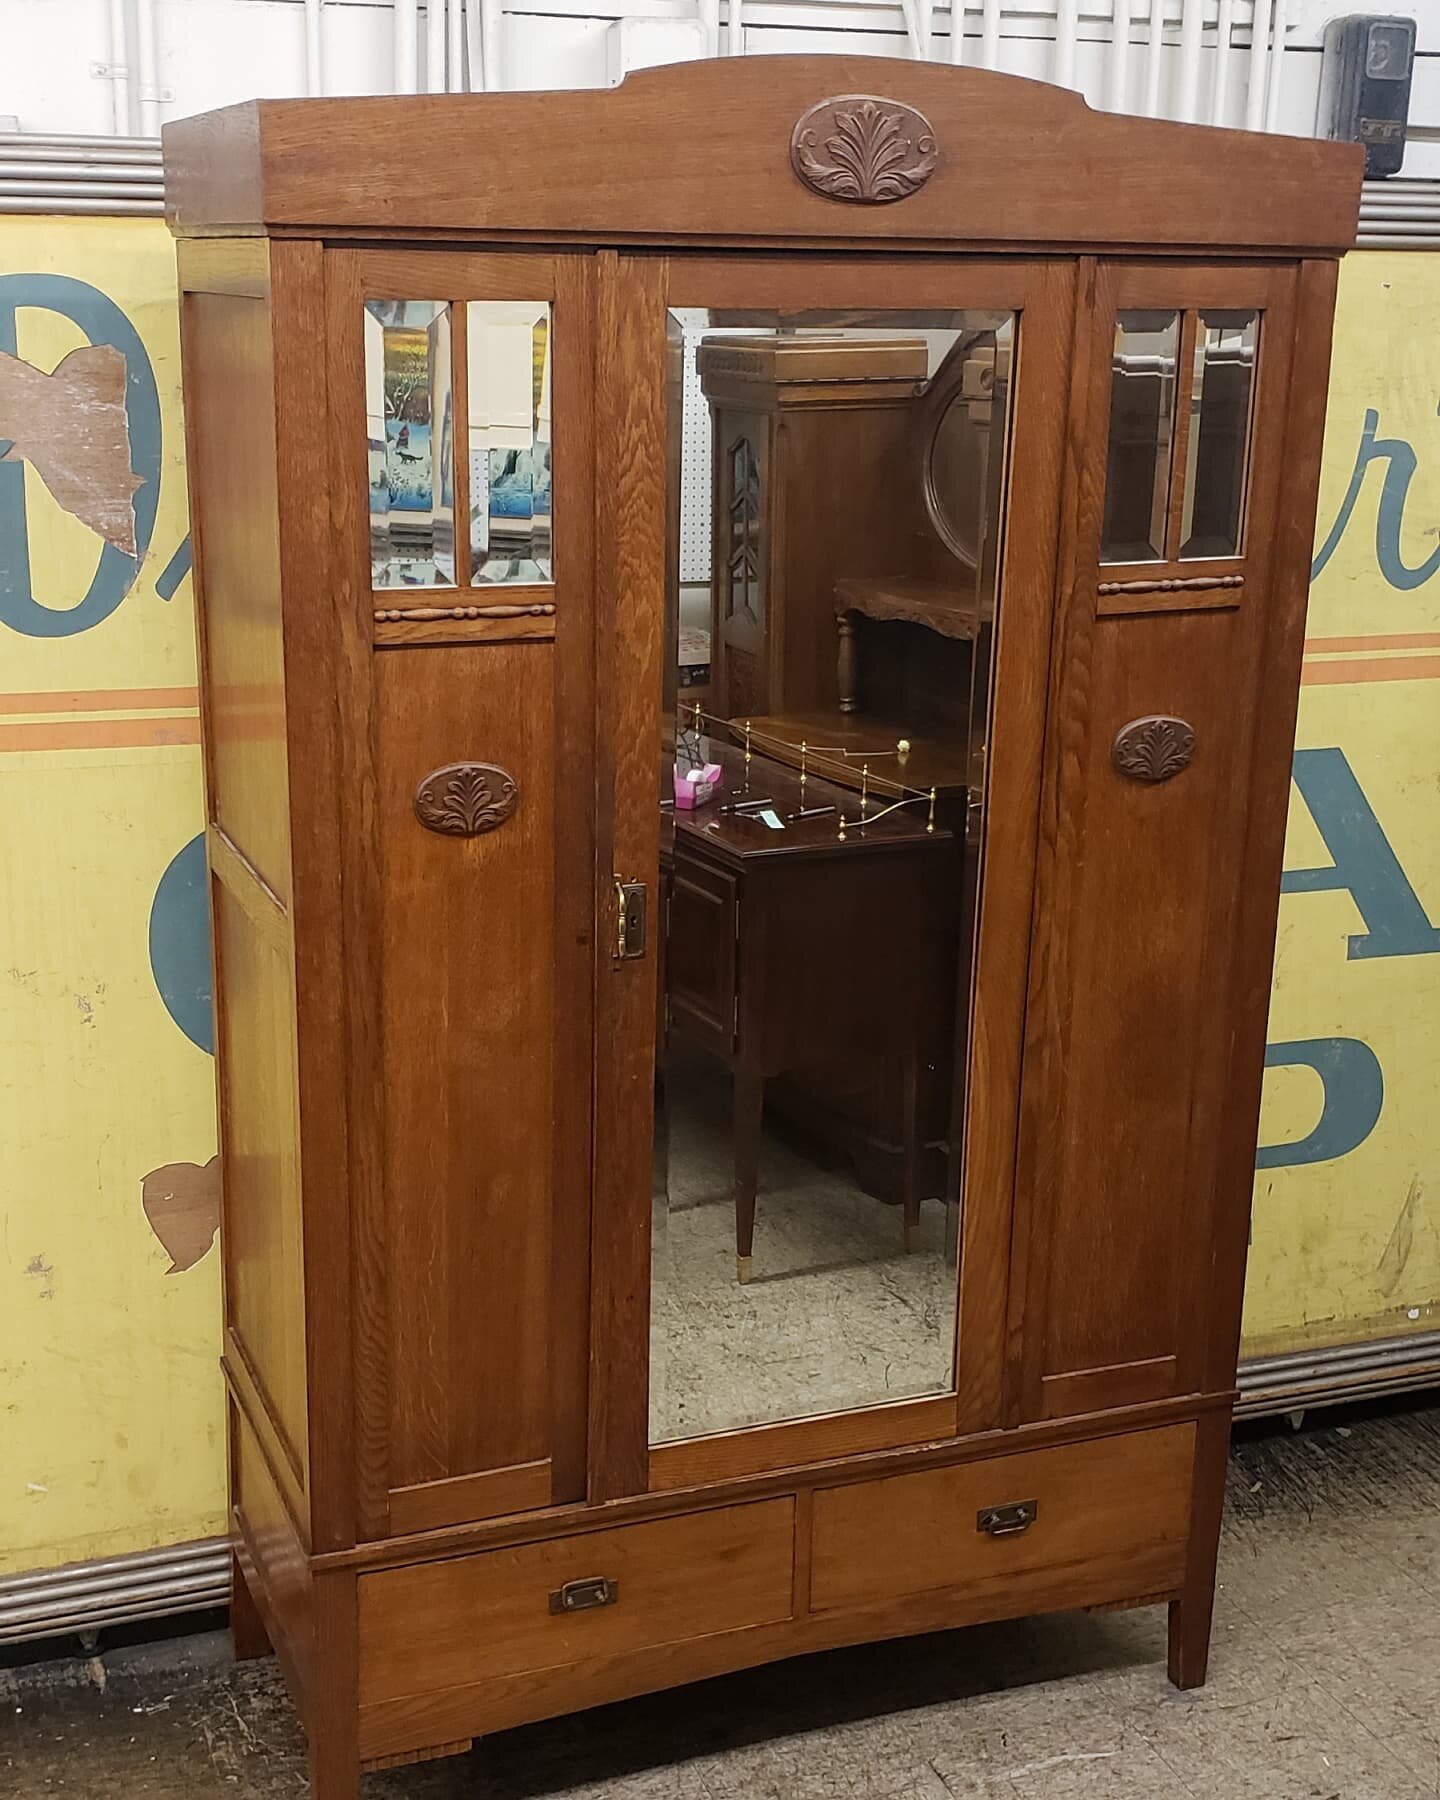 $200. Antique wood wardrobe armoire closet dresser with 2 bottom drawers. 7' tall 51.5&quot; wide 22&quot; deep. 
Please check my other ads.
Plus Tax
This item is located in my antique store space in the city of Orange.

#orangecircle #downtownorange